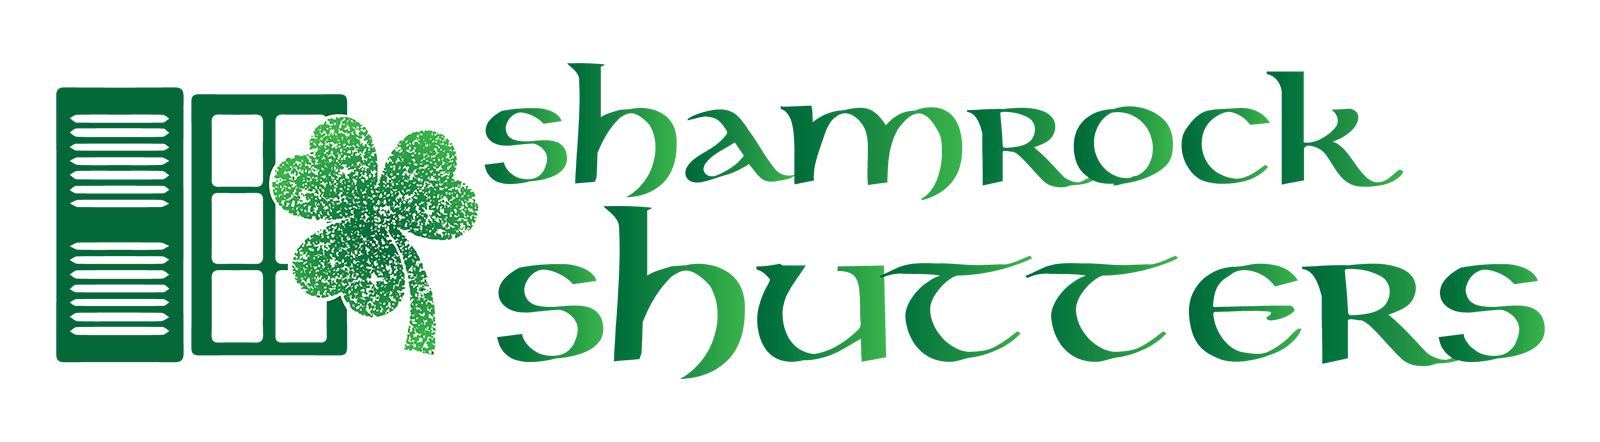 Shamrock Shutters Canada – Best Prices on Shutters and Blinds in the Hamilton and Halton Regions!